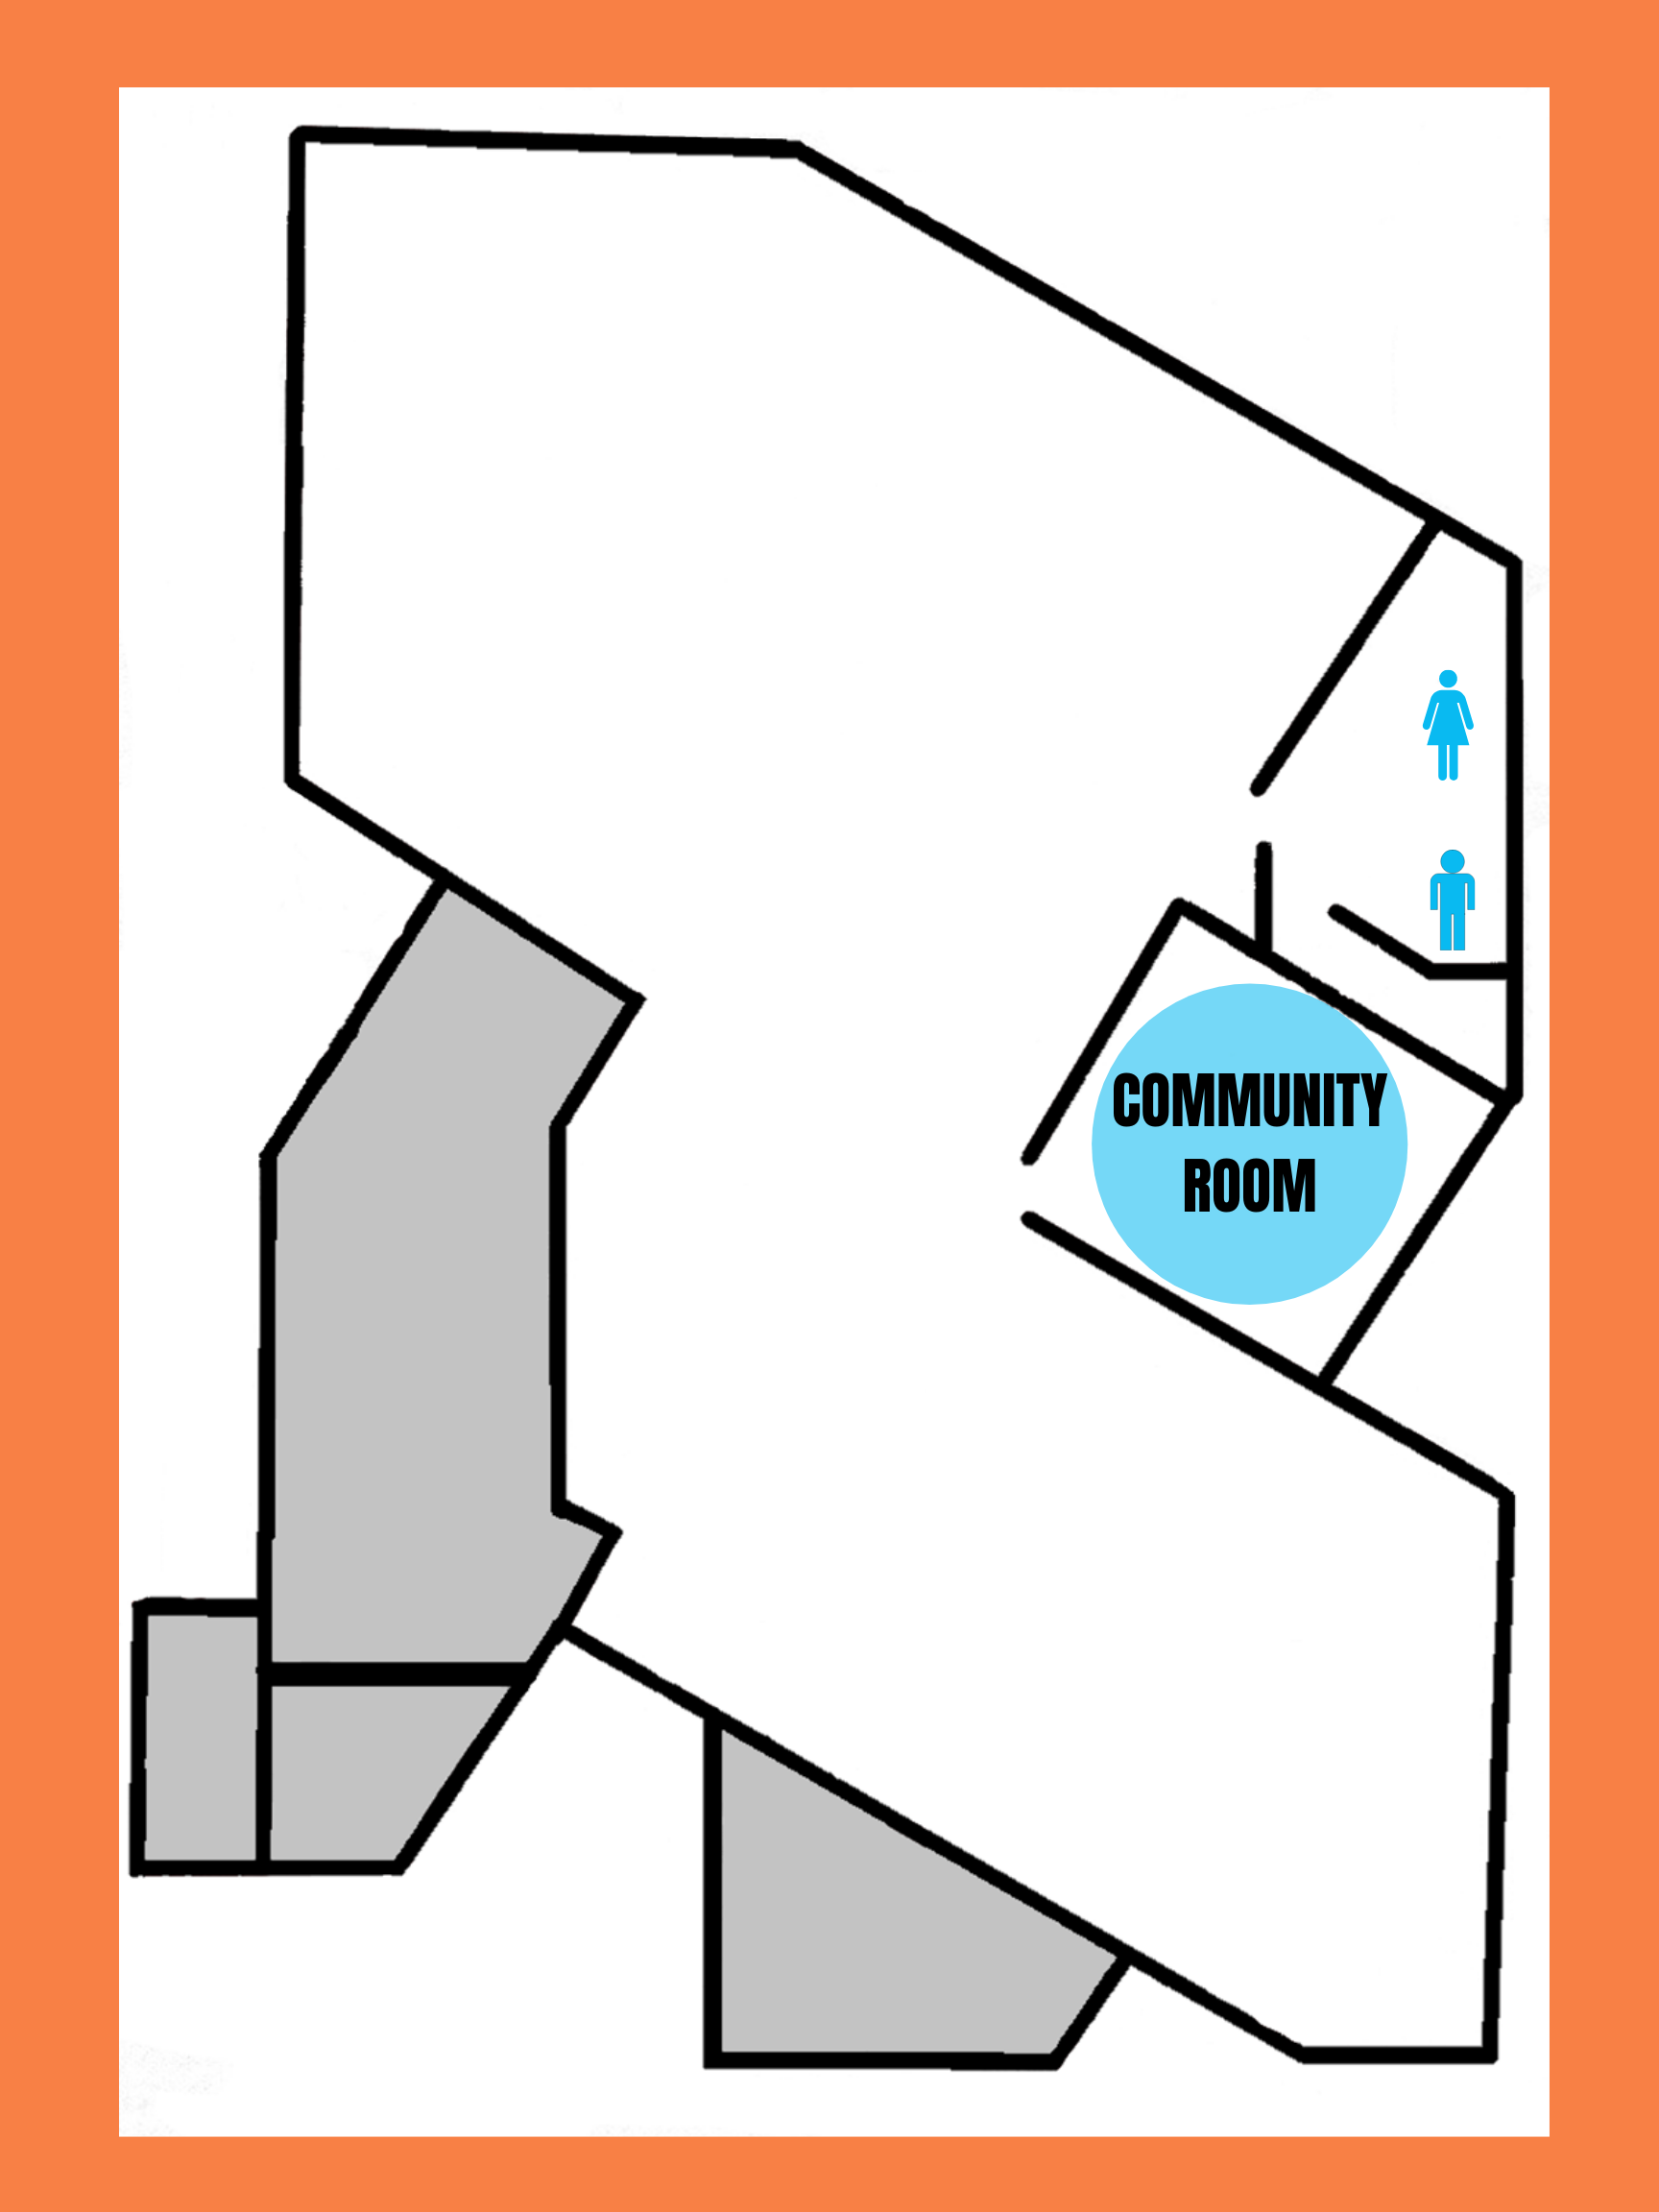 Map of floor plan of Troke Branch Library showing big dot in Community Room